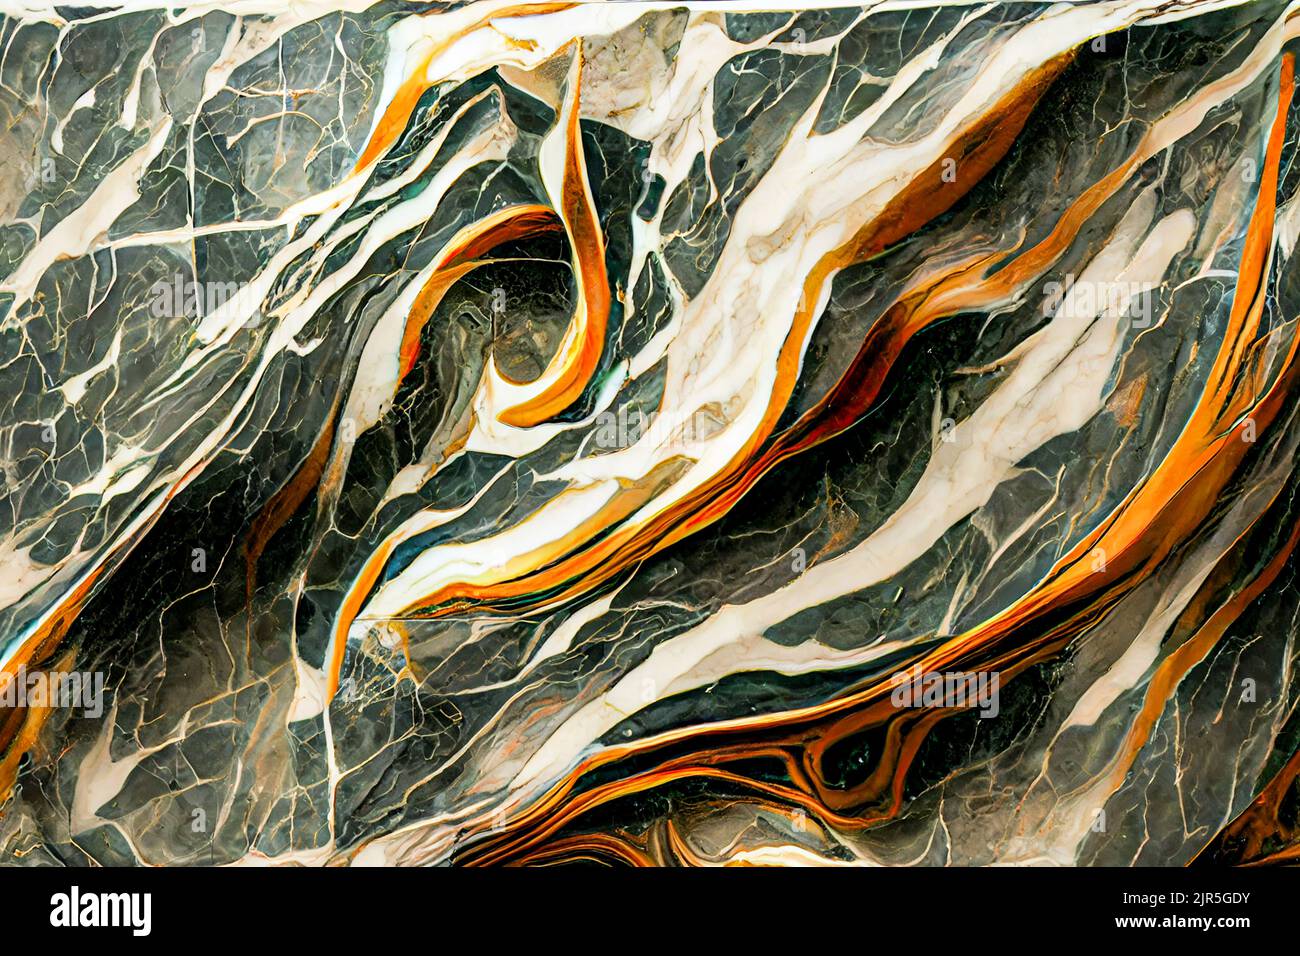 Abstract Gold Rosso Levanto Marble Wallpaper. Digital Art 3D illustration Stock Photo